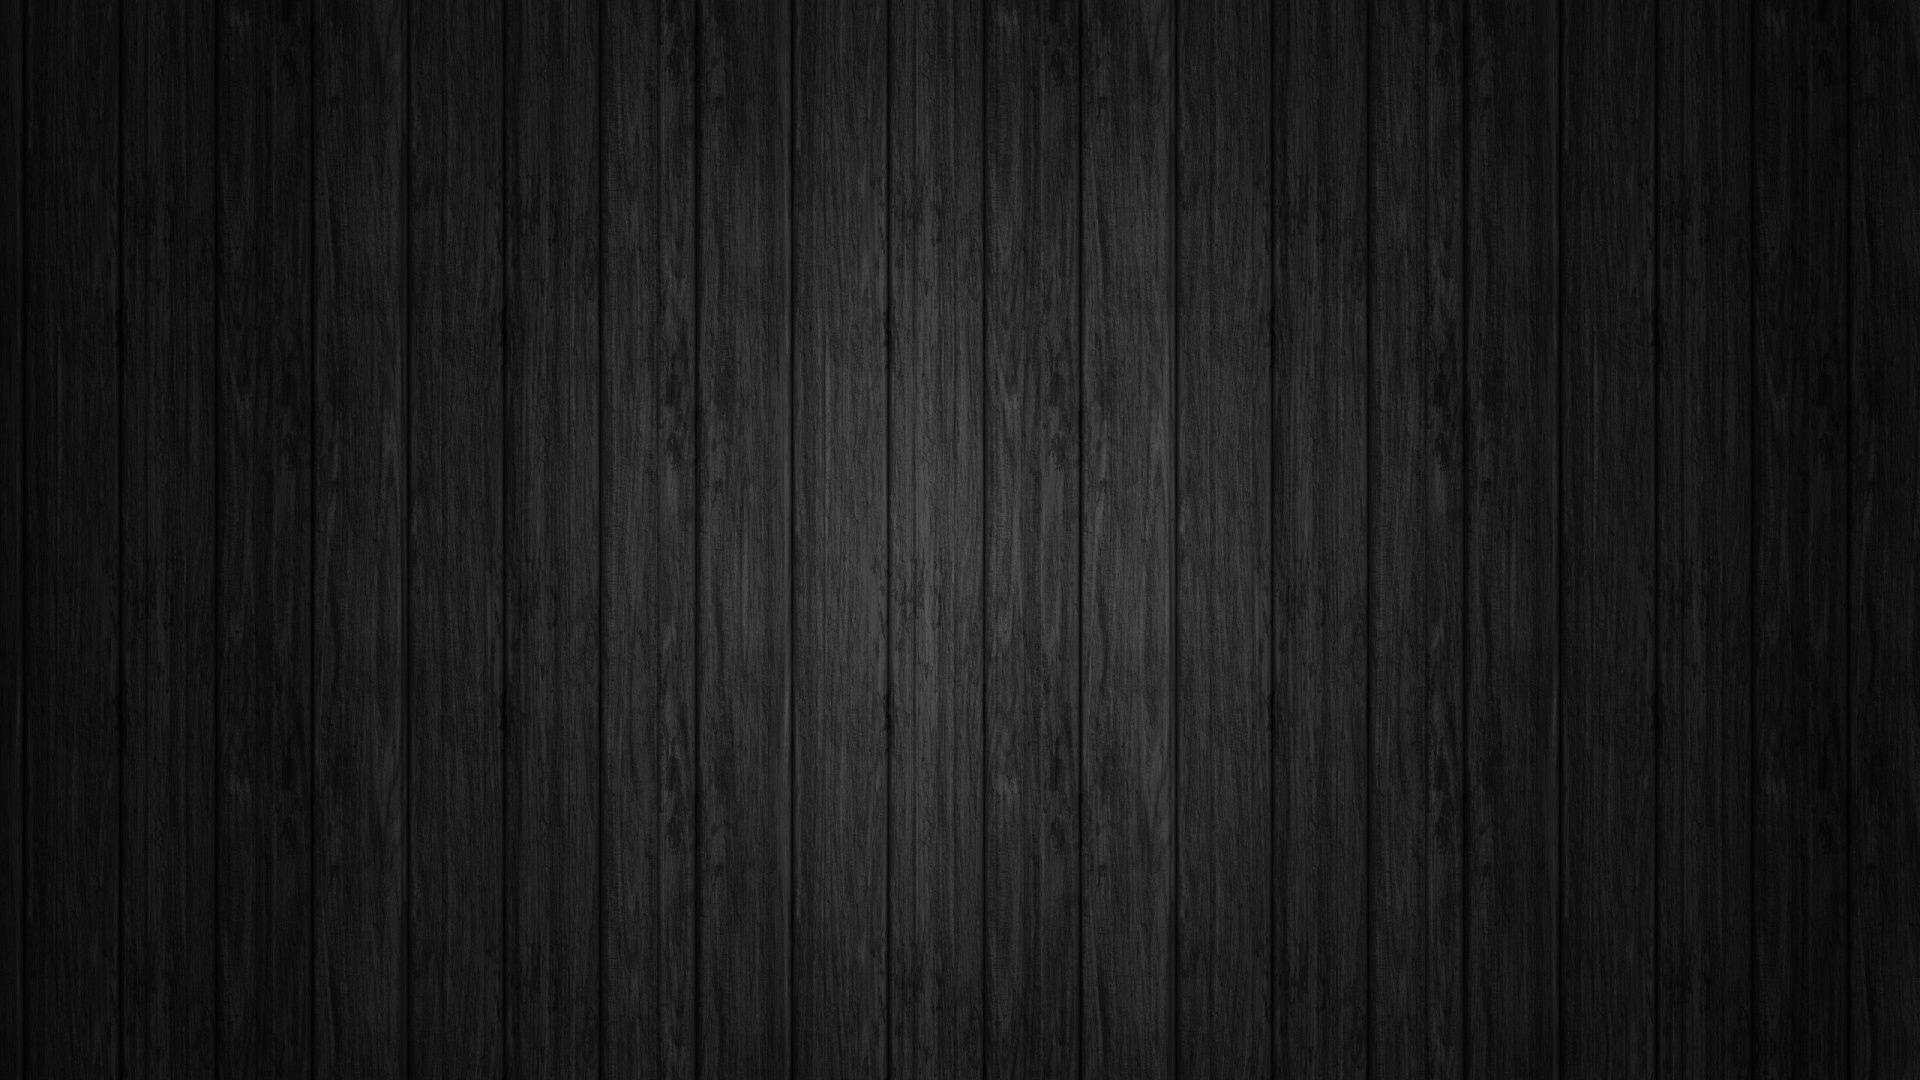 All Black Desktop Backgrounds HD with high-resolution 1920x1080 pixel. You can use this wallpaper for your Windows and Mac OS computers as well as your Android and iPhone smartphones